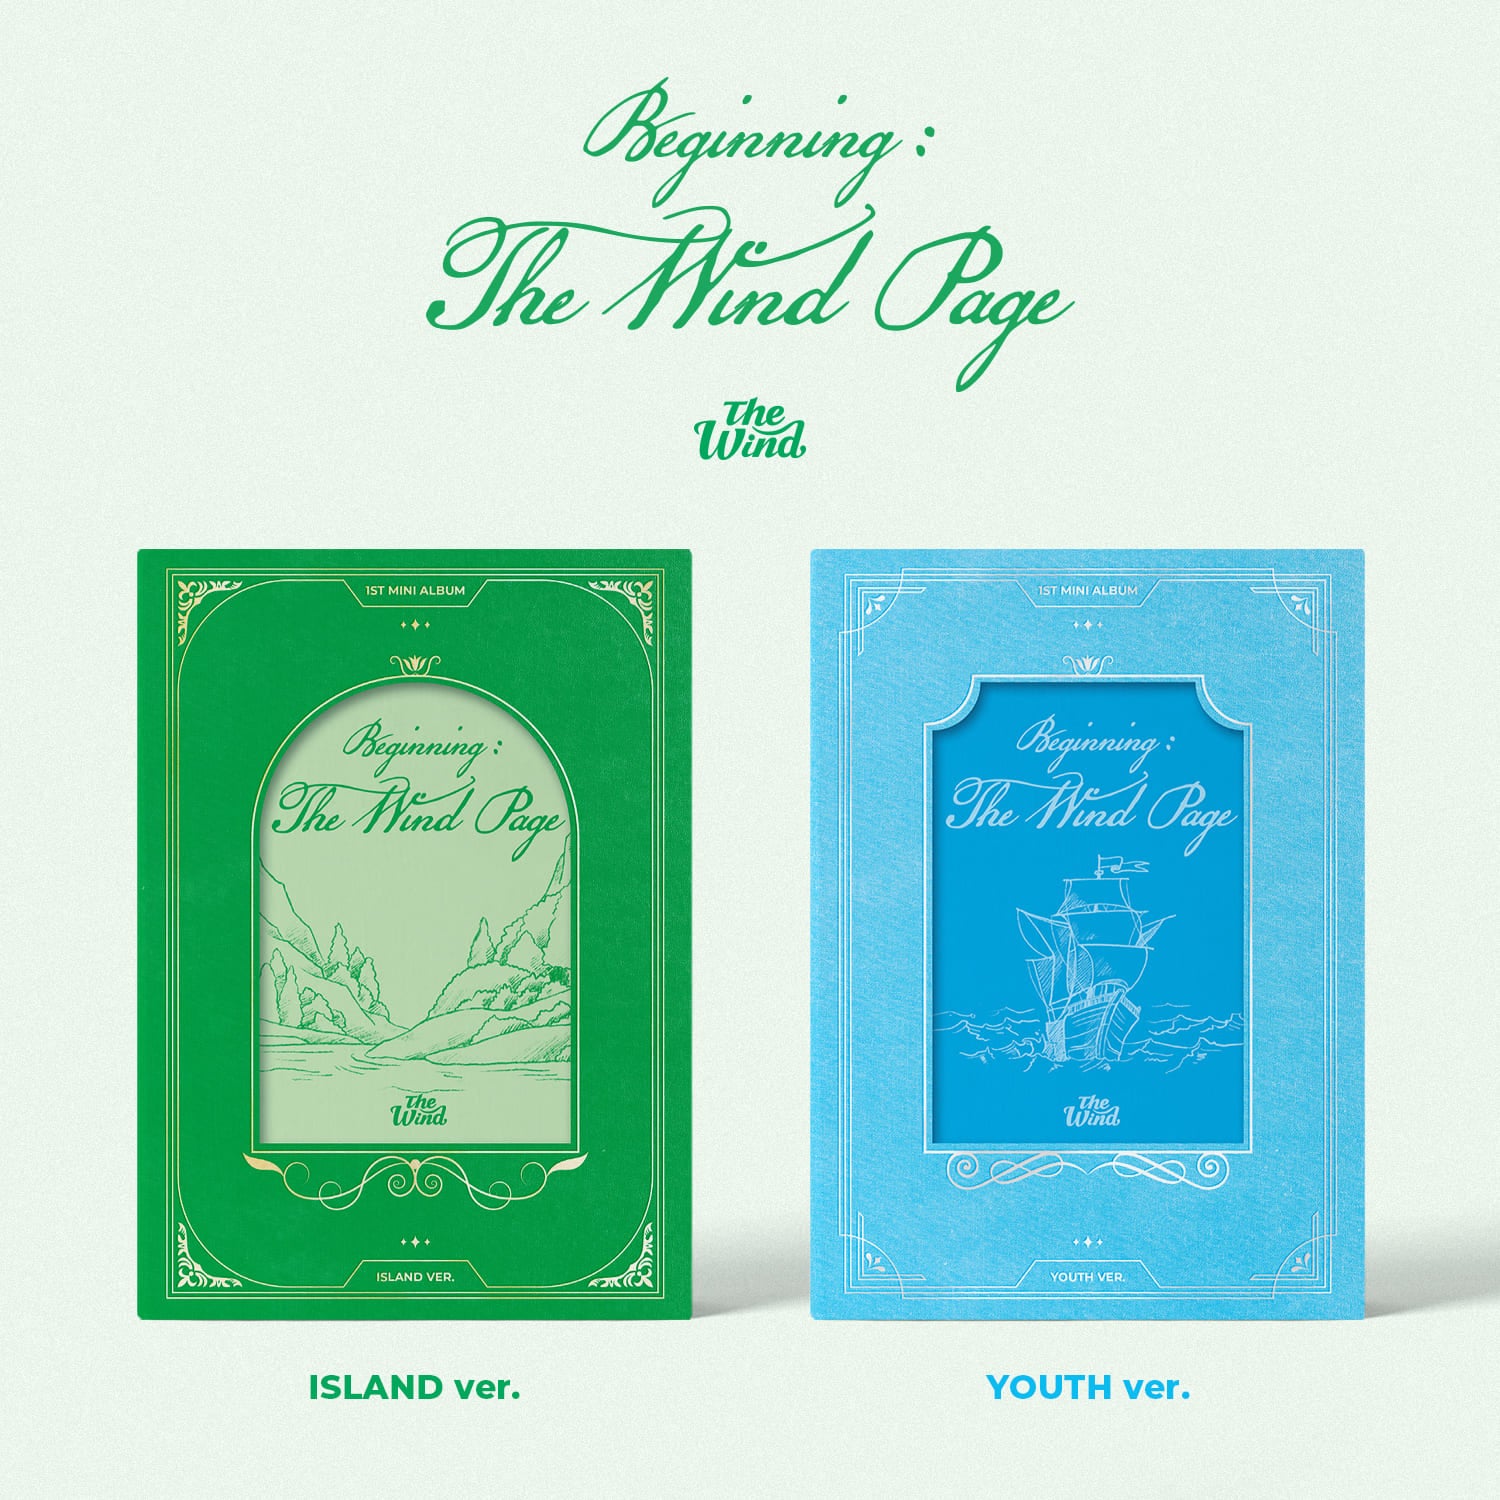 The Wind [Beginning : The Wind Page] 1st Mini Album